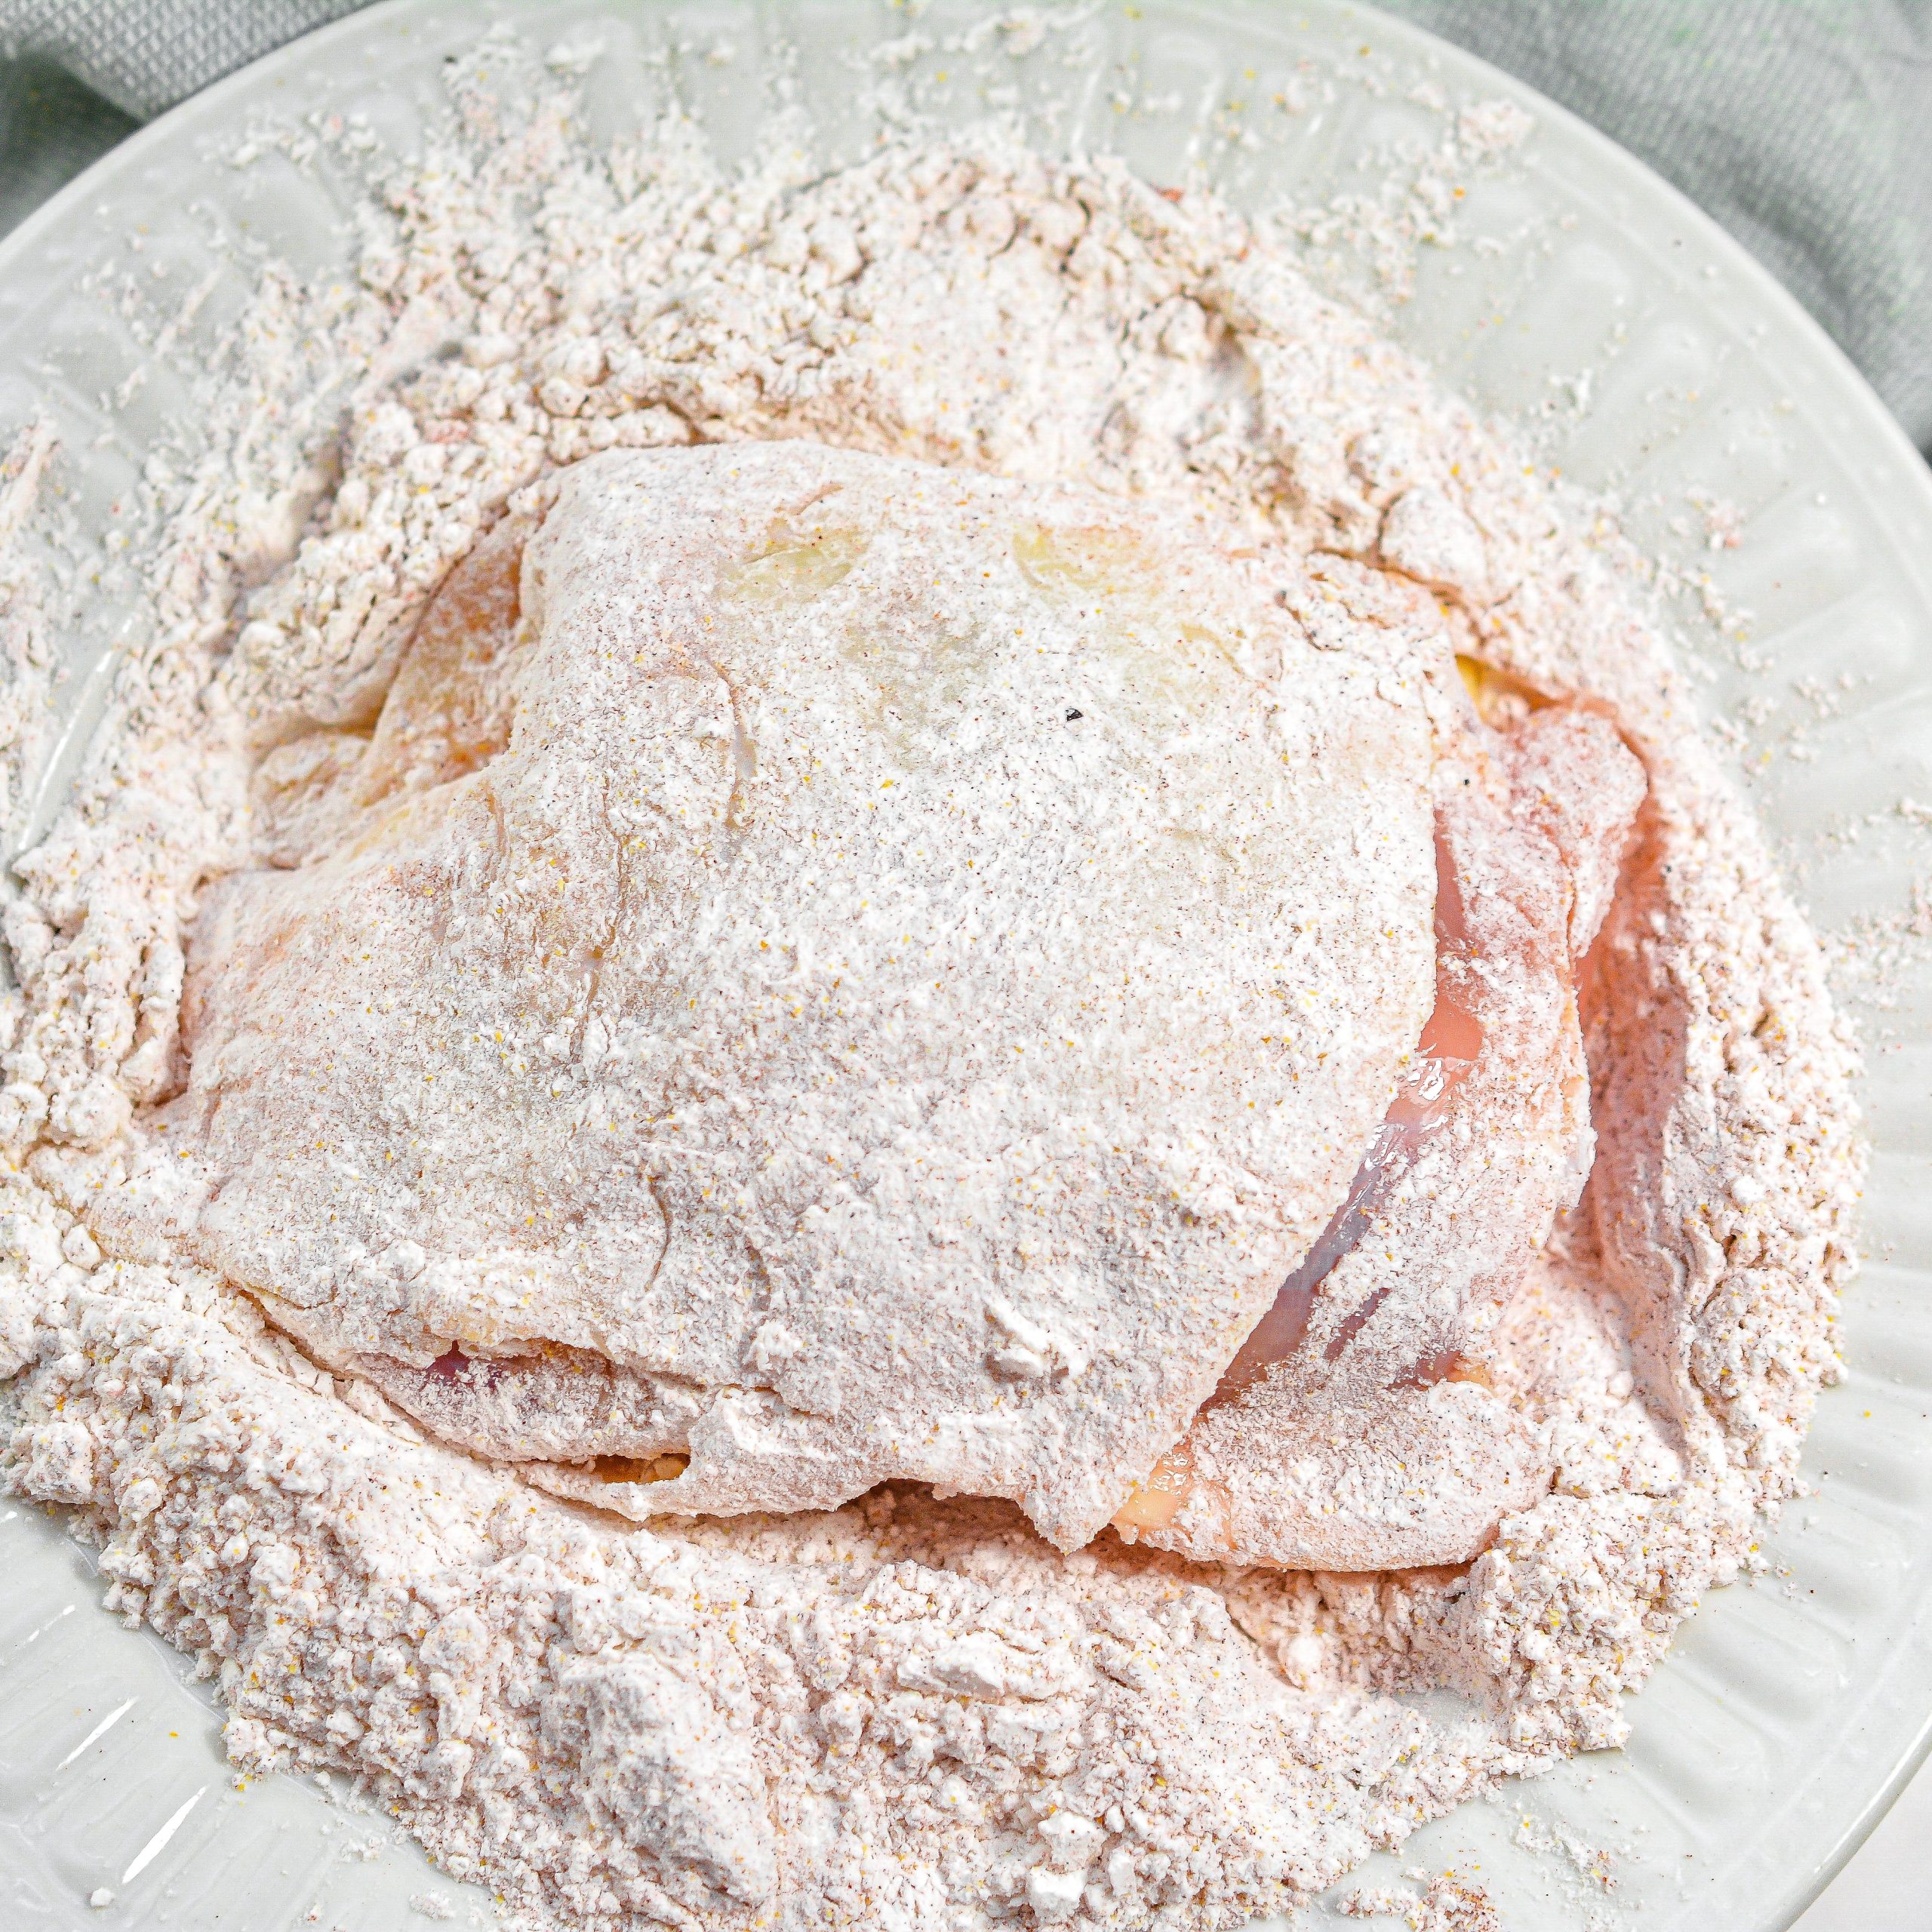 Dredge the chicken well in the flour mixture 